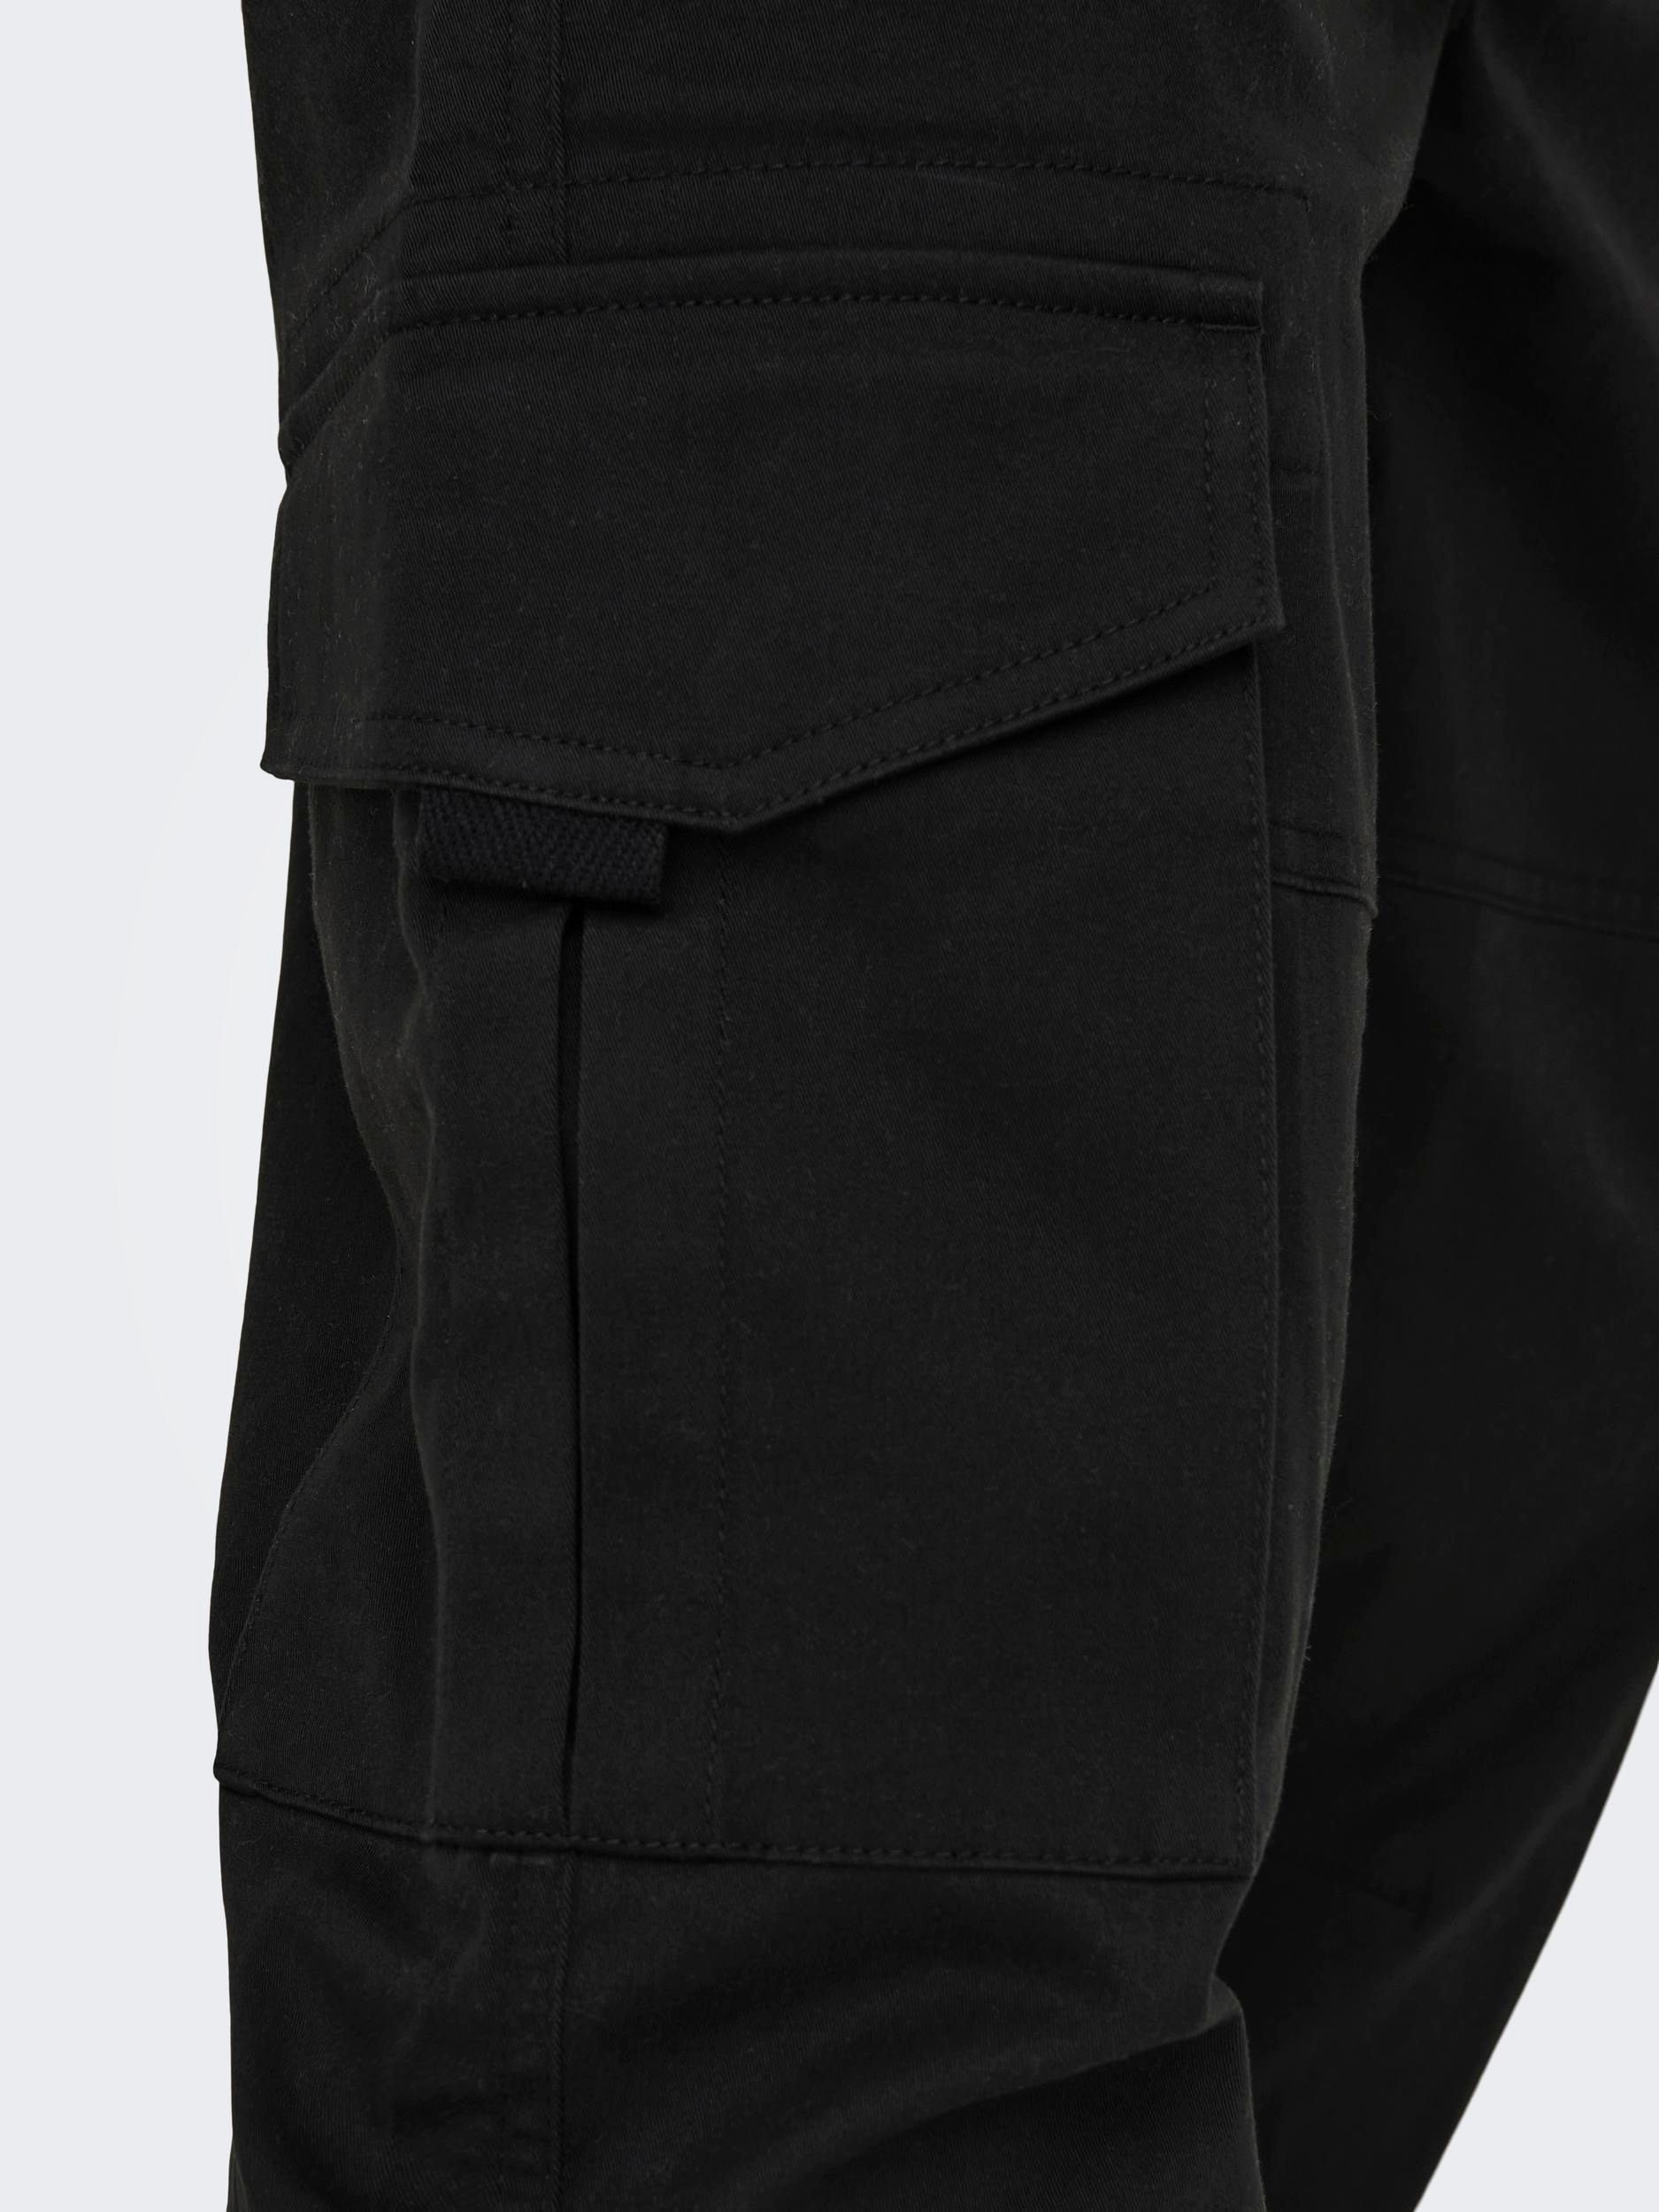 SONS Chinos black & 1 ONLY